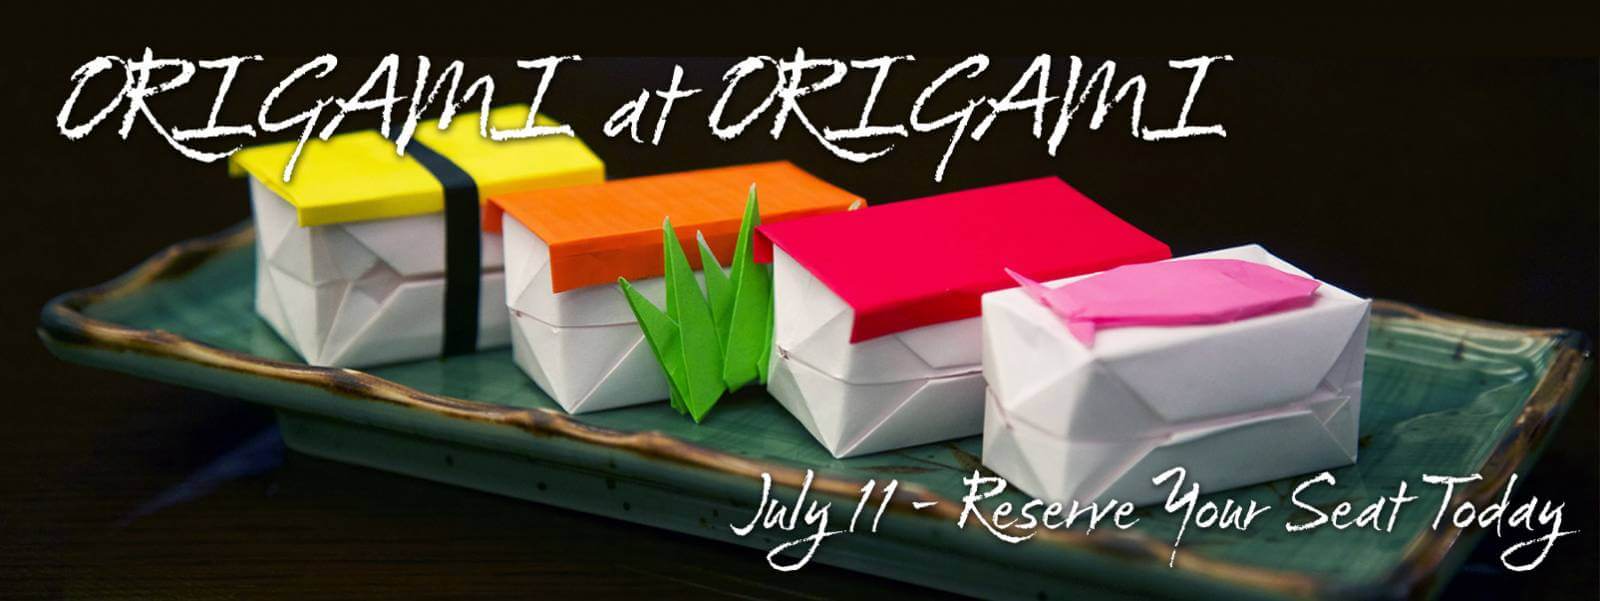 ORIGAMI AT ORIGAMI JULY 11